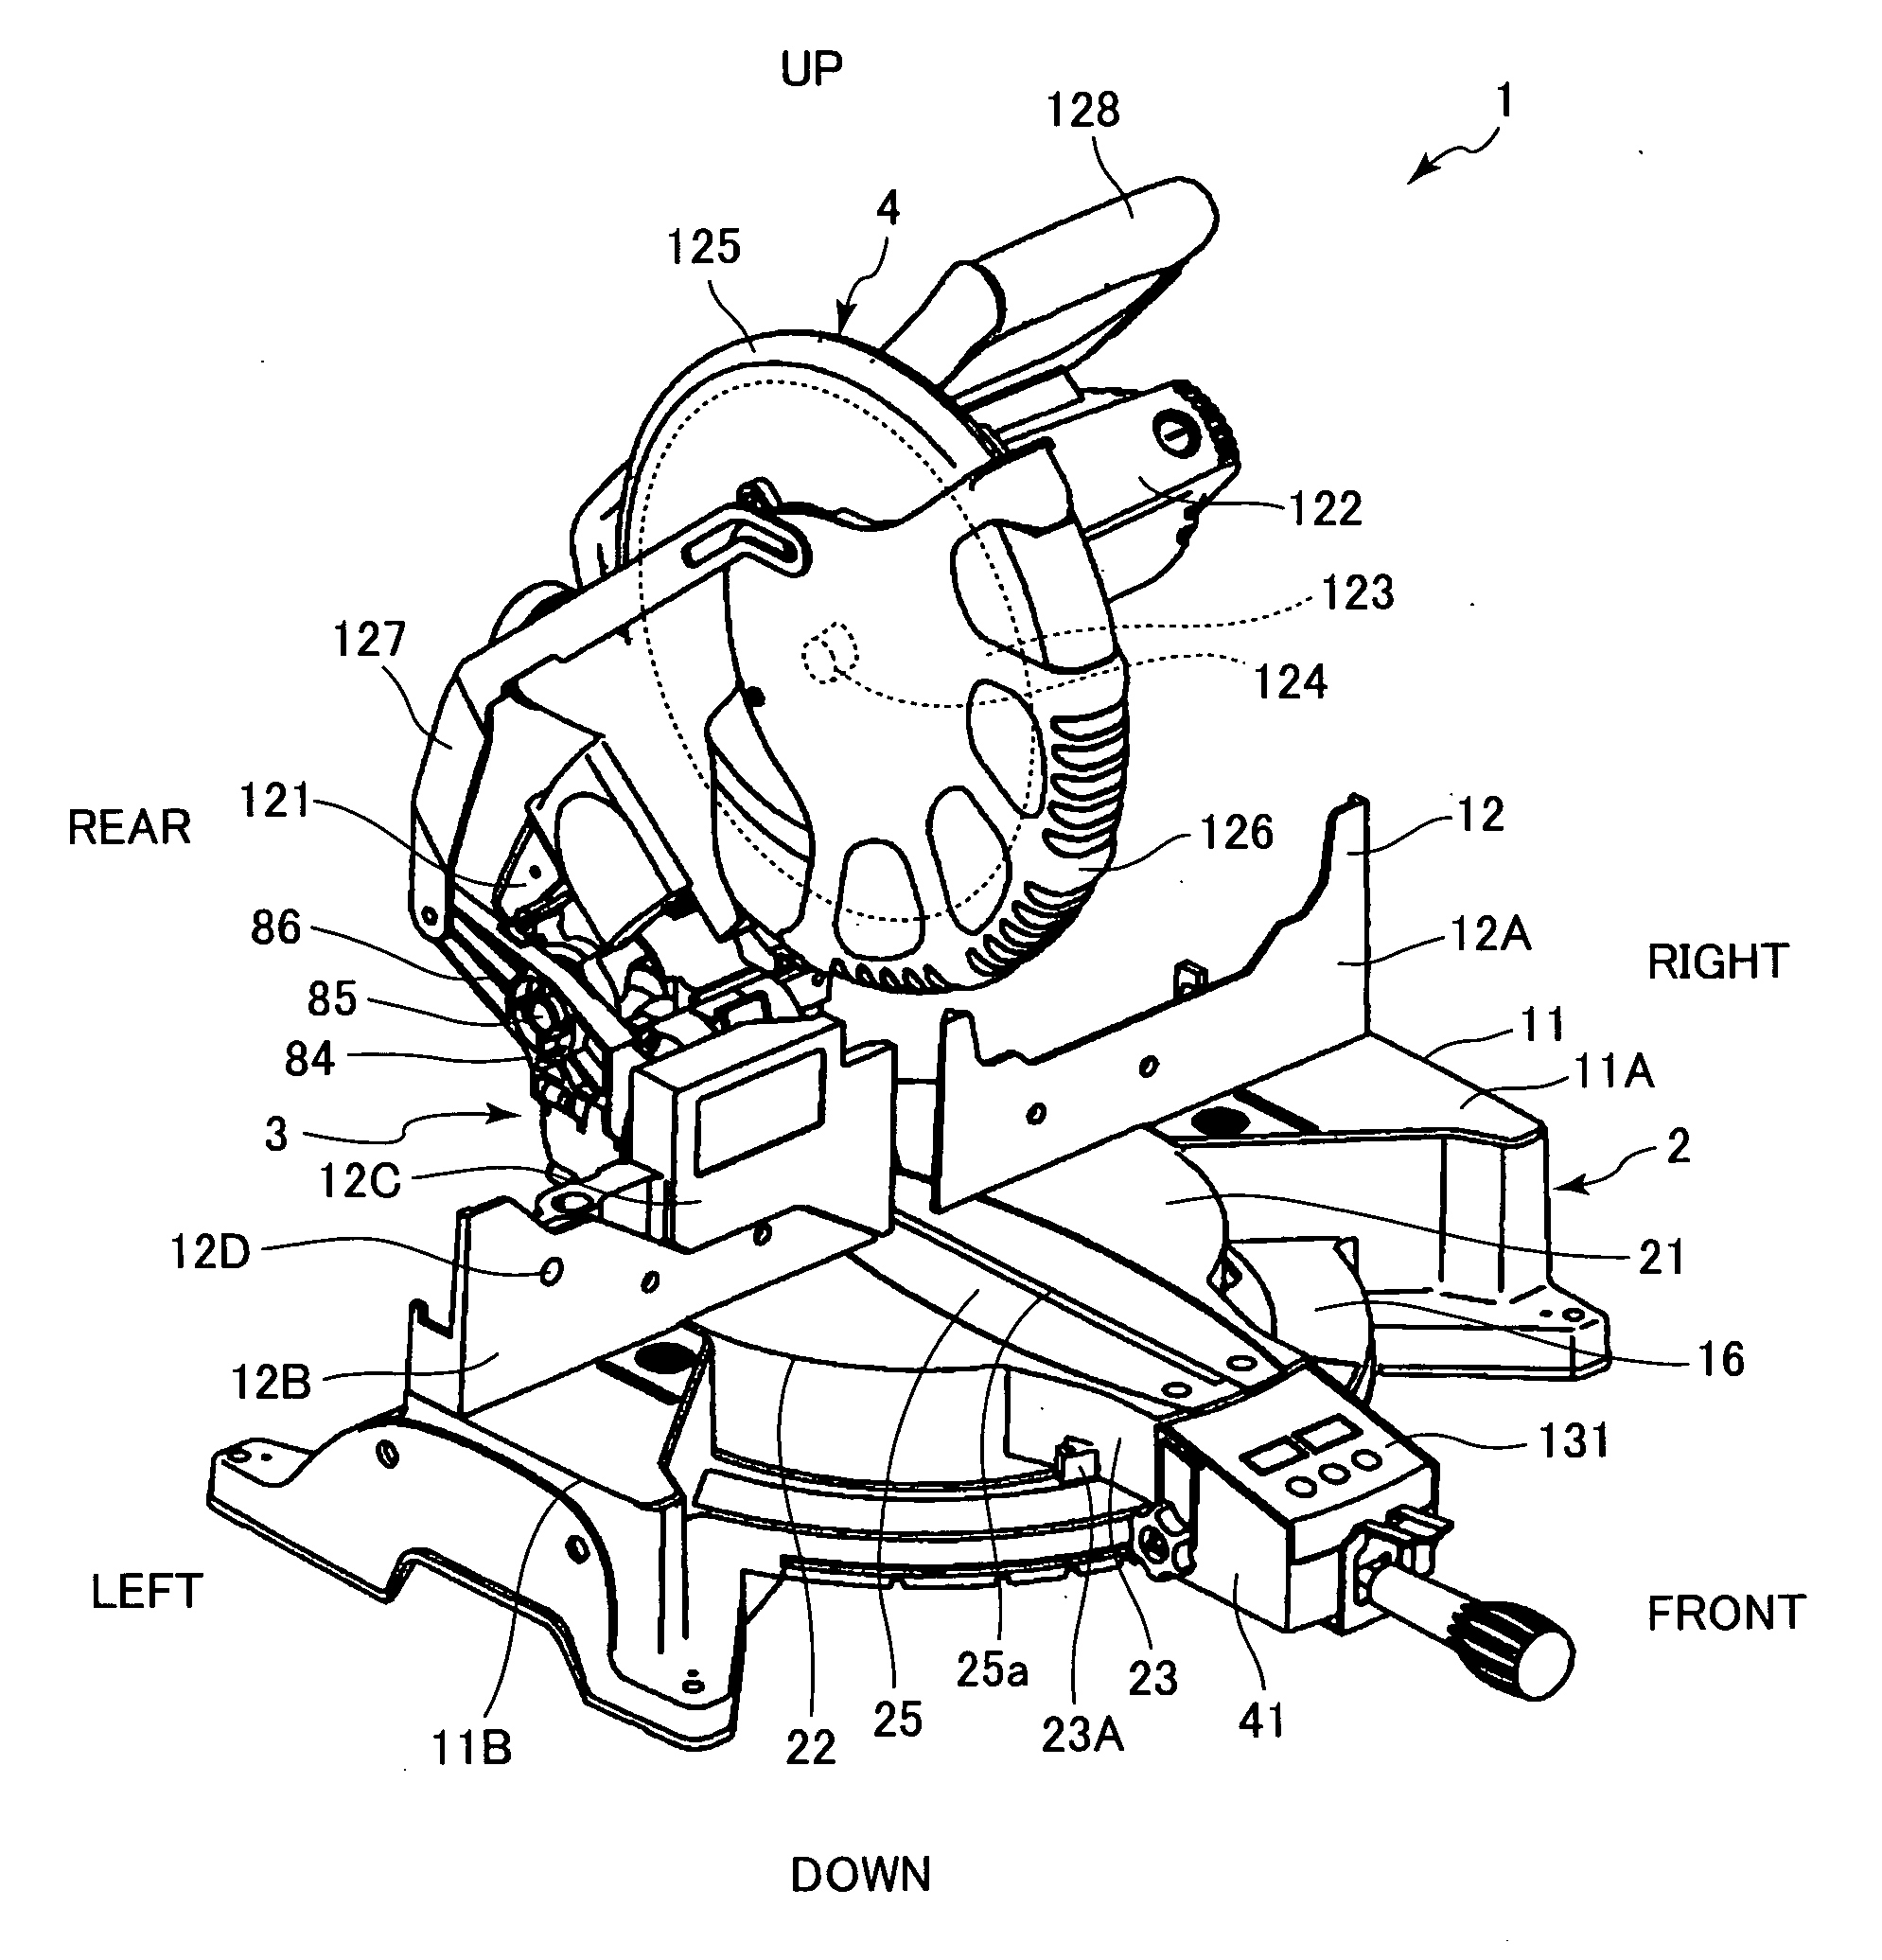 Miter saw having digital display capable of displaying specific angle